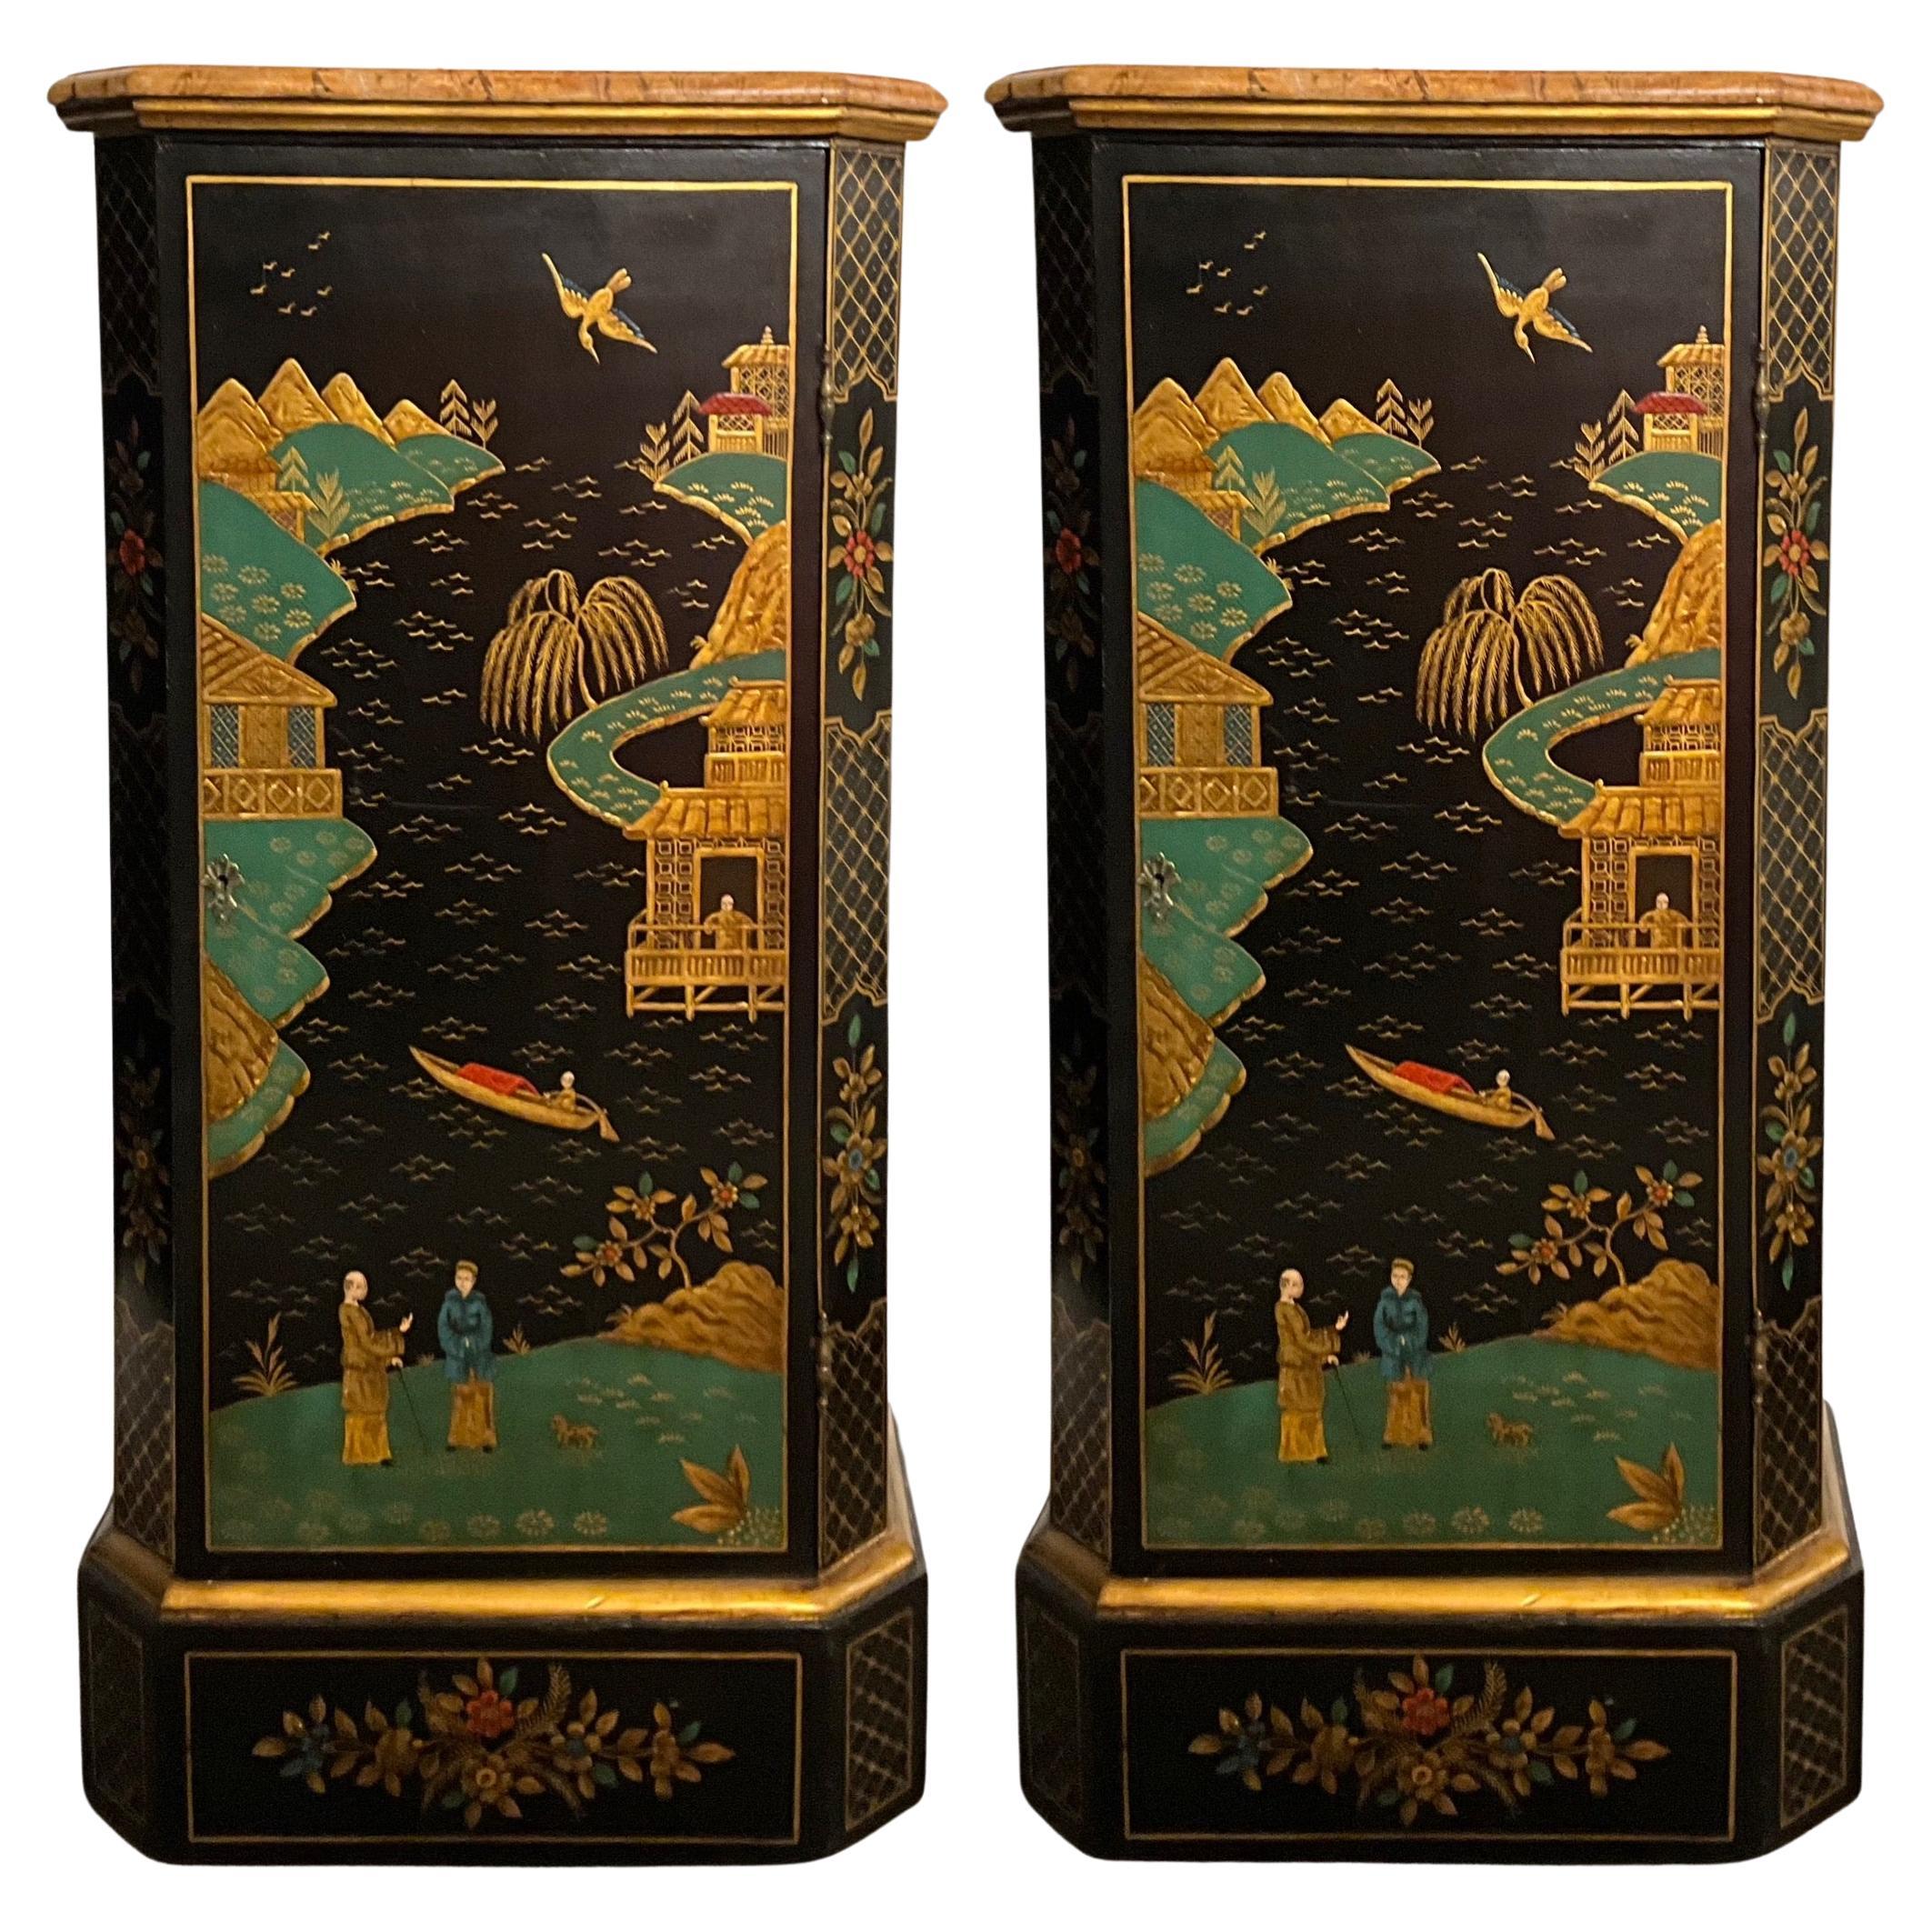 These are lovely. This is a pair of chinoiserie pedestals with a bright green / turquoise interior storage section. The tops and bases are hand painted in a faux marble. The body is black with chinoiserie pastoral scenes and gilt accents. They are